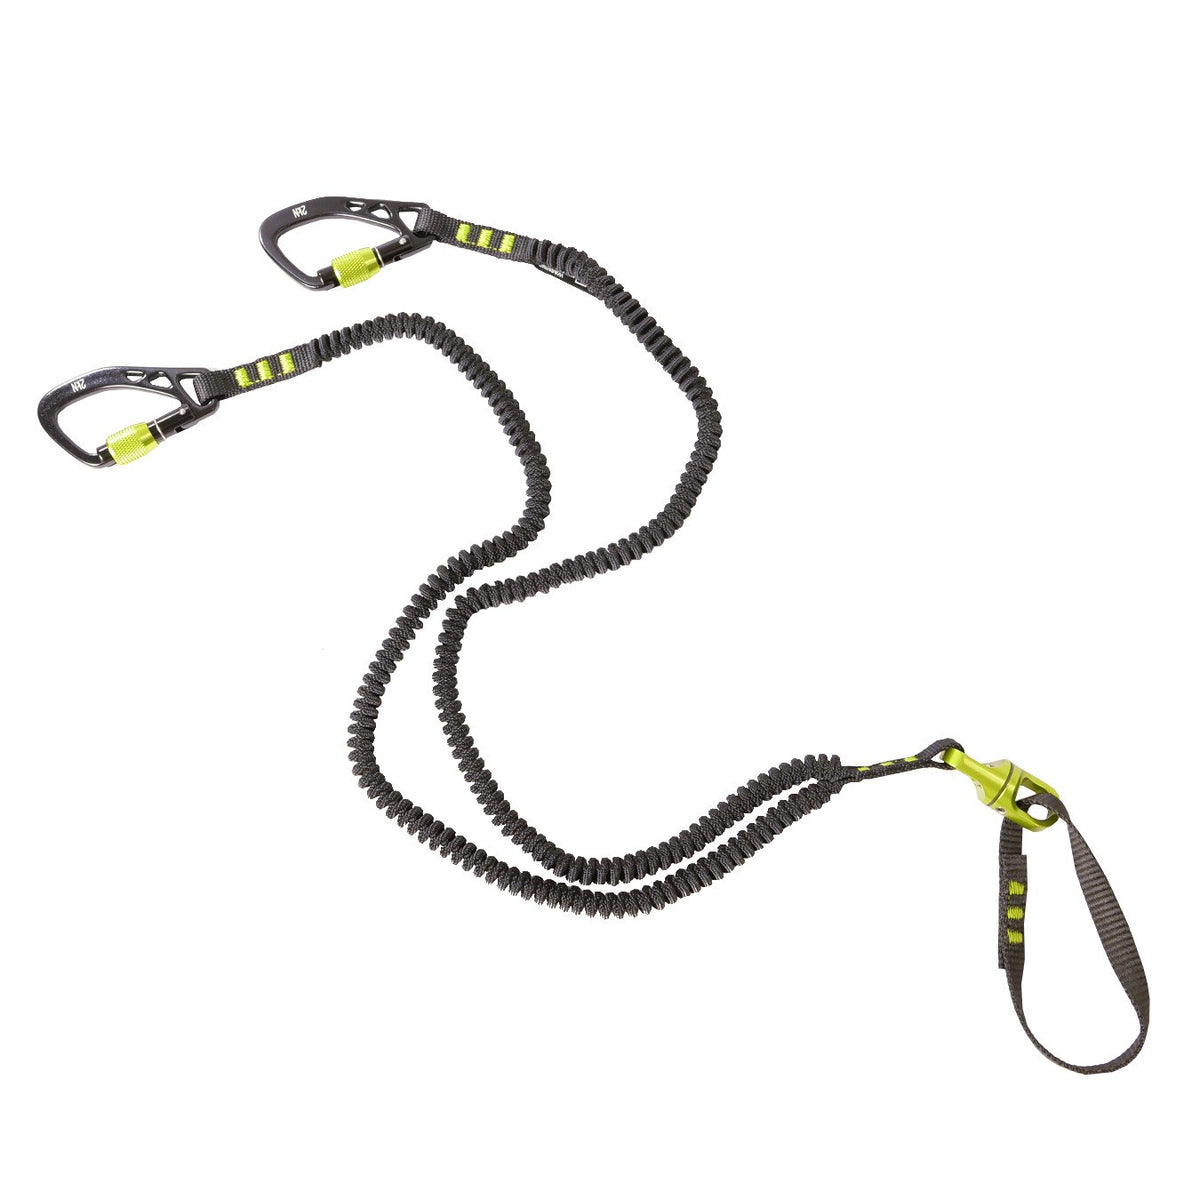 Black Diamond Spinner Leash in Green and Black with Screw gates, stretchy lanyard and Spinner